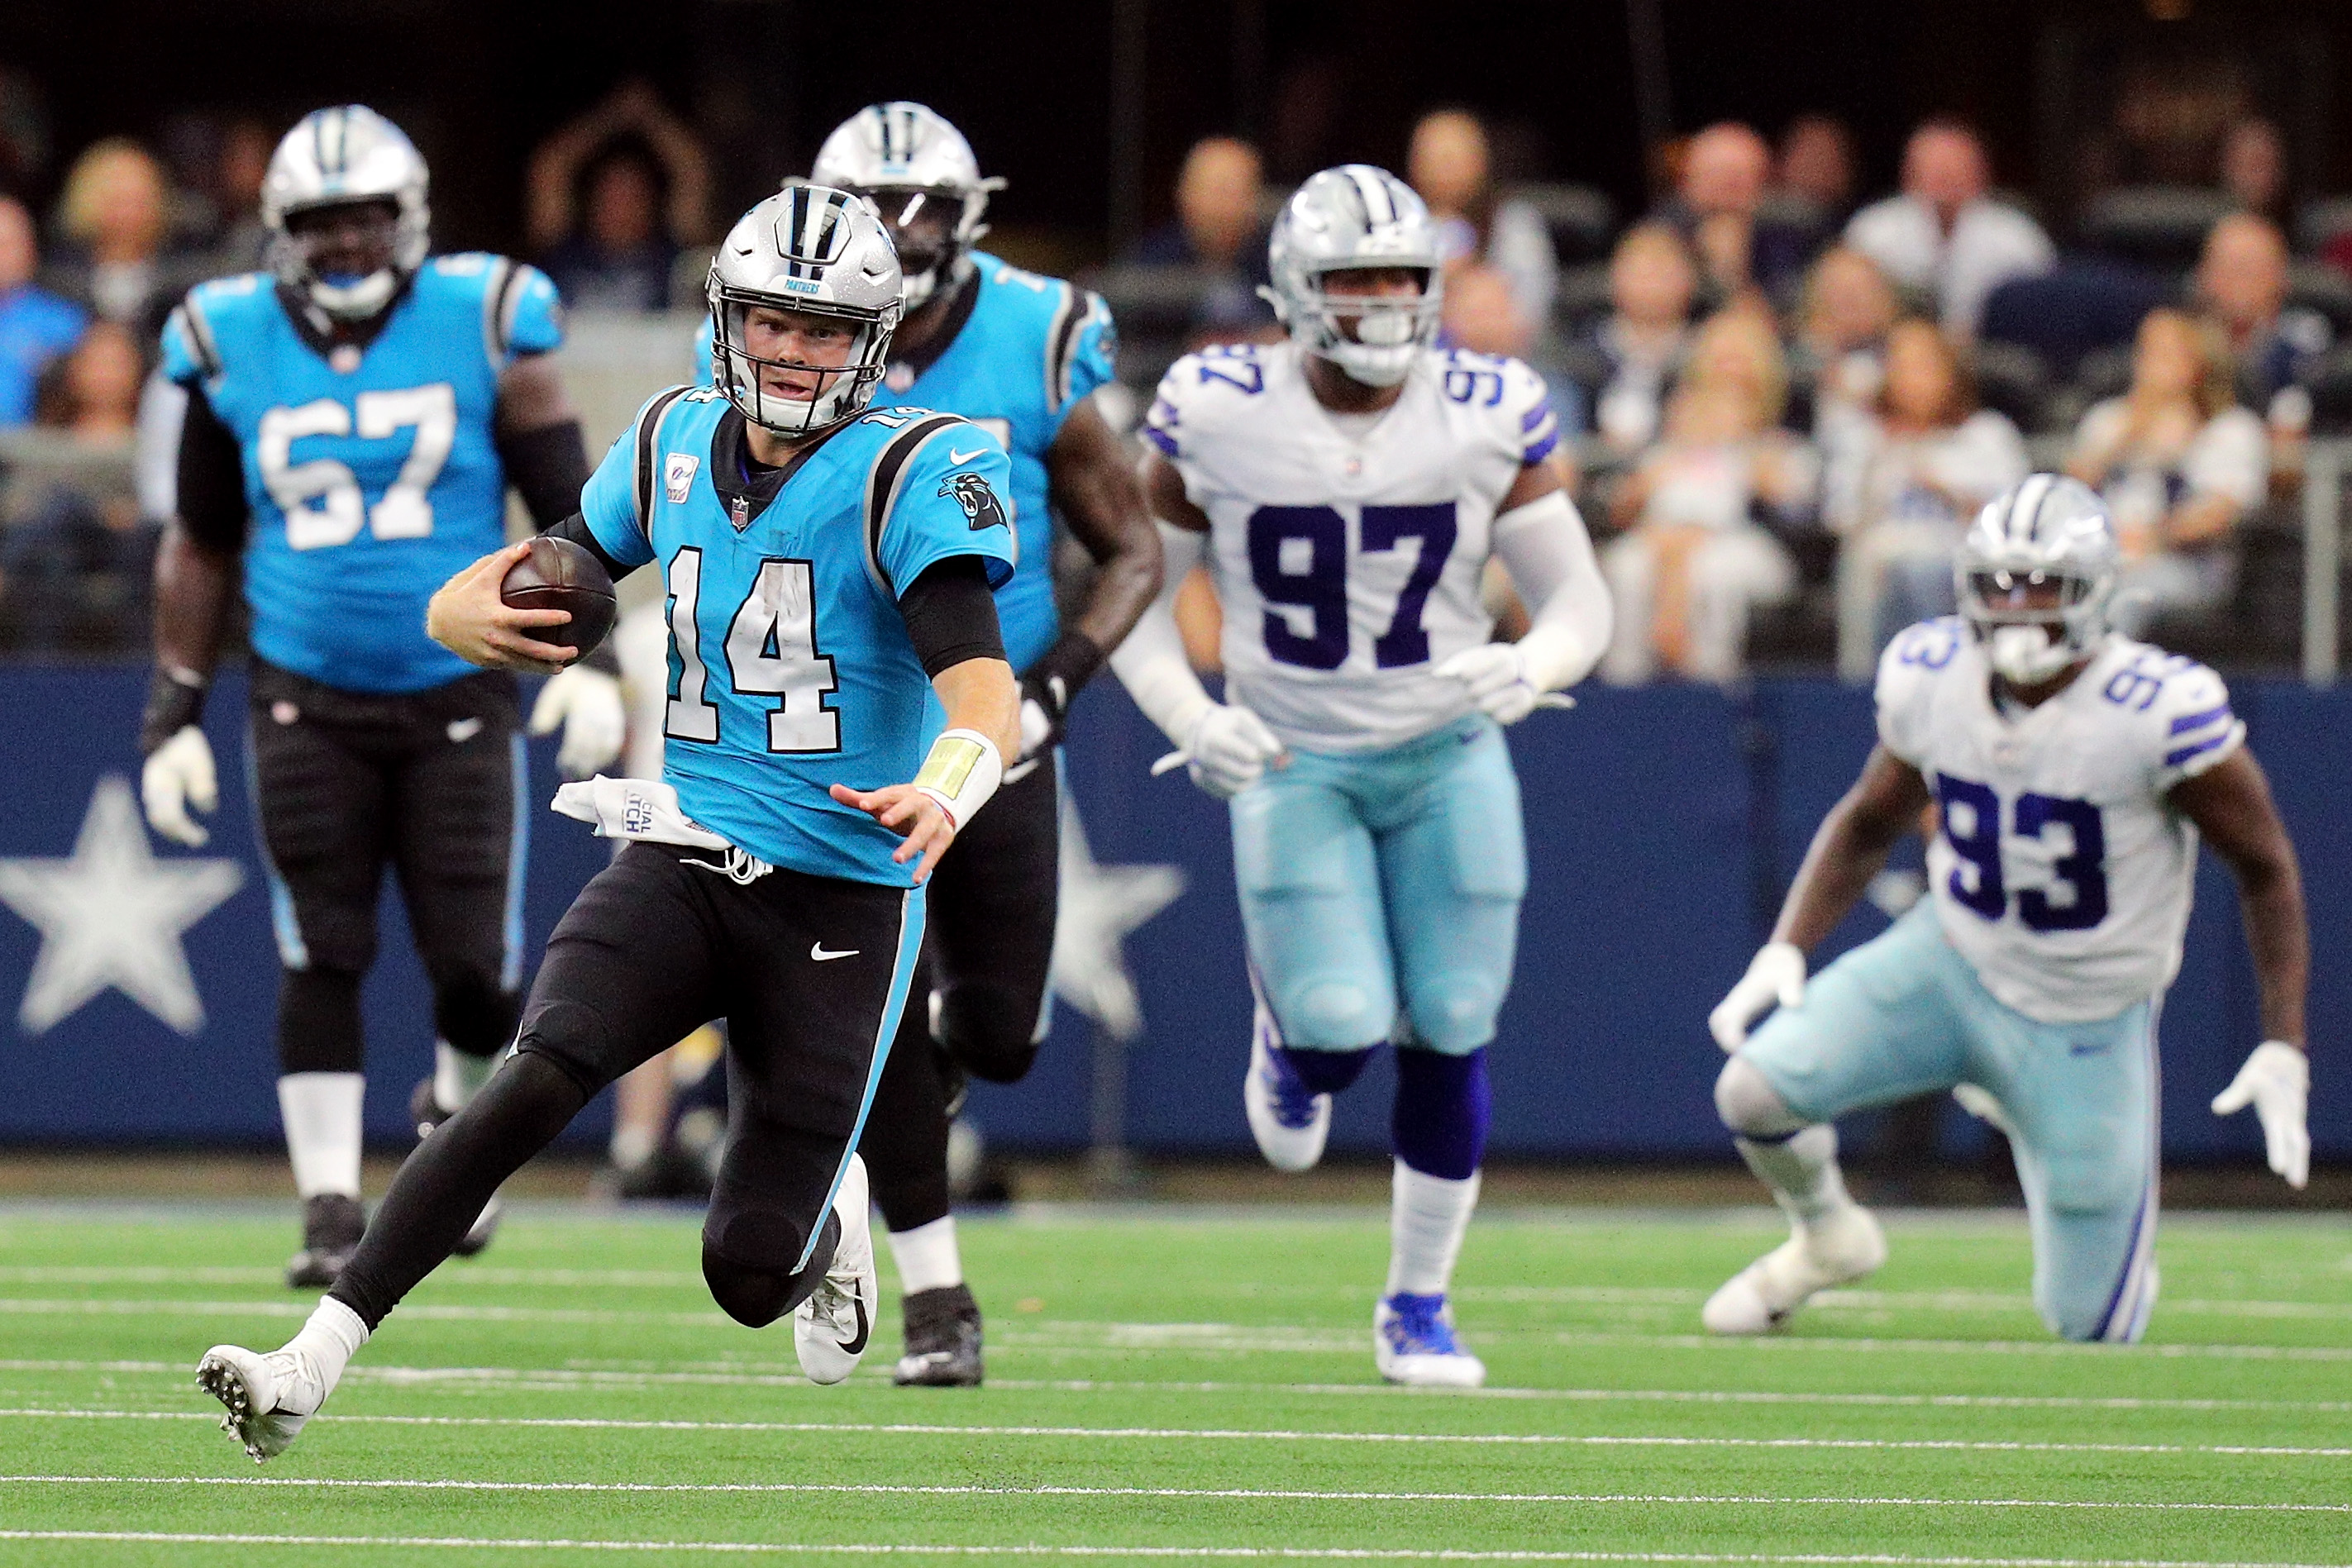 Carolina Panthers QB Sam Darnold against the Dallas Cowboys in October 2021